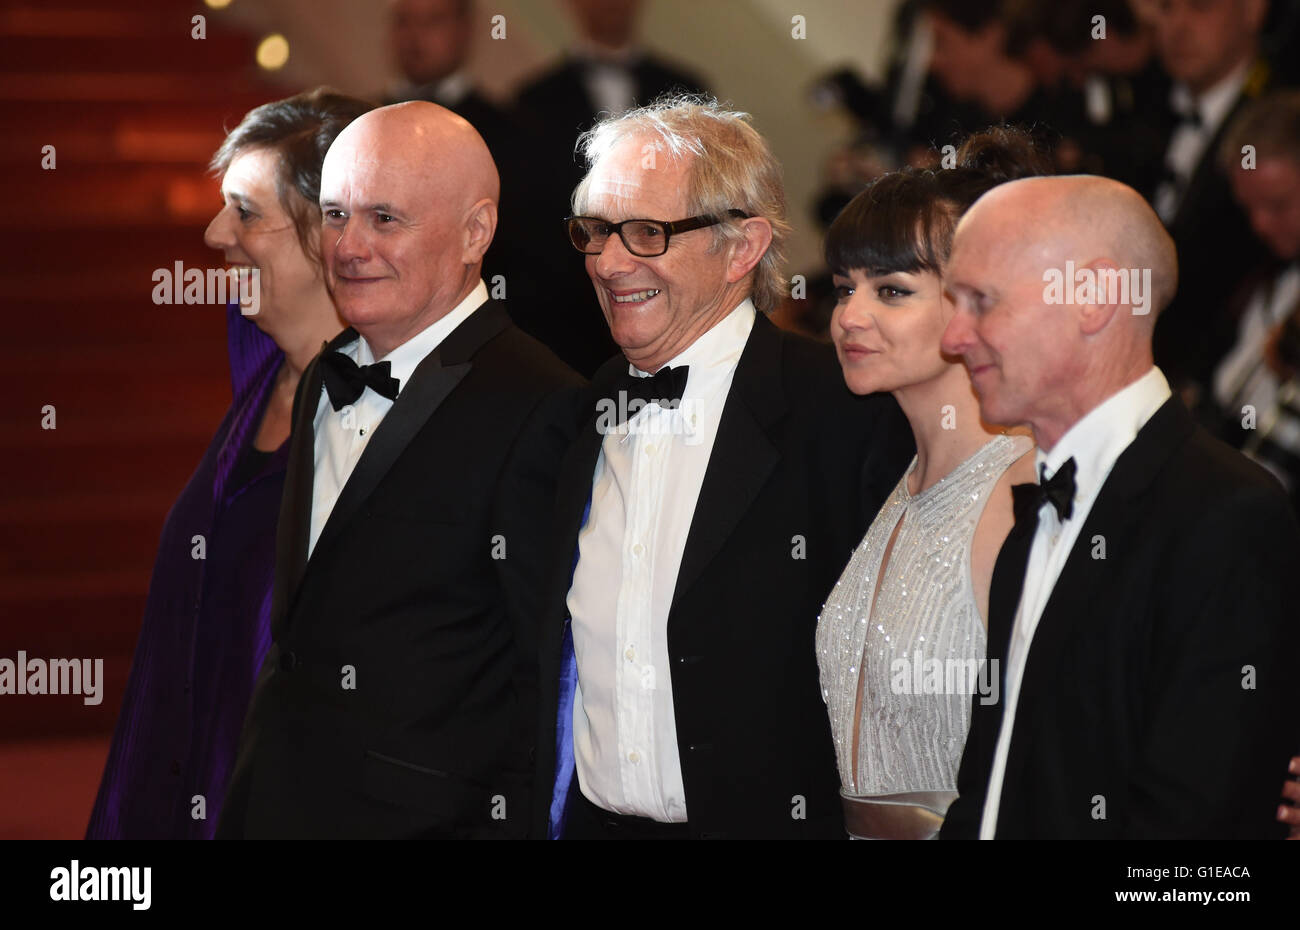 Cannes, France. 13th May, 2016. (L-R) British producer Rebecca O'Brien, British screenwriter Paul Laverty, British director Ken Loach British actress Hayley Squires and British actor Dave Johns arrive for the screening of 'I, Daniel Blake' during the 69th annual Cannes Film Festival, in Cannes, France, 13 May 2016. Photo: Felix Hoerhager/dpa/Alamy Live News Stock Photo